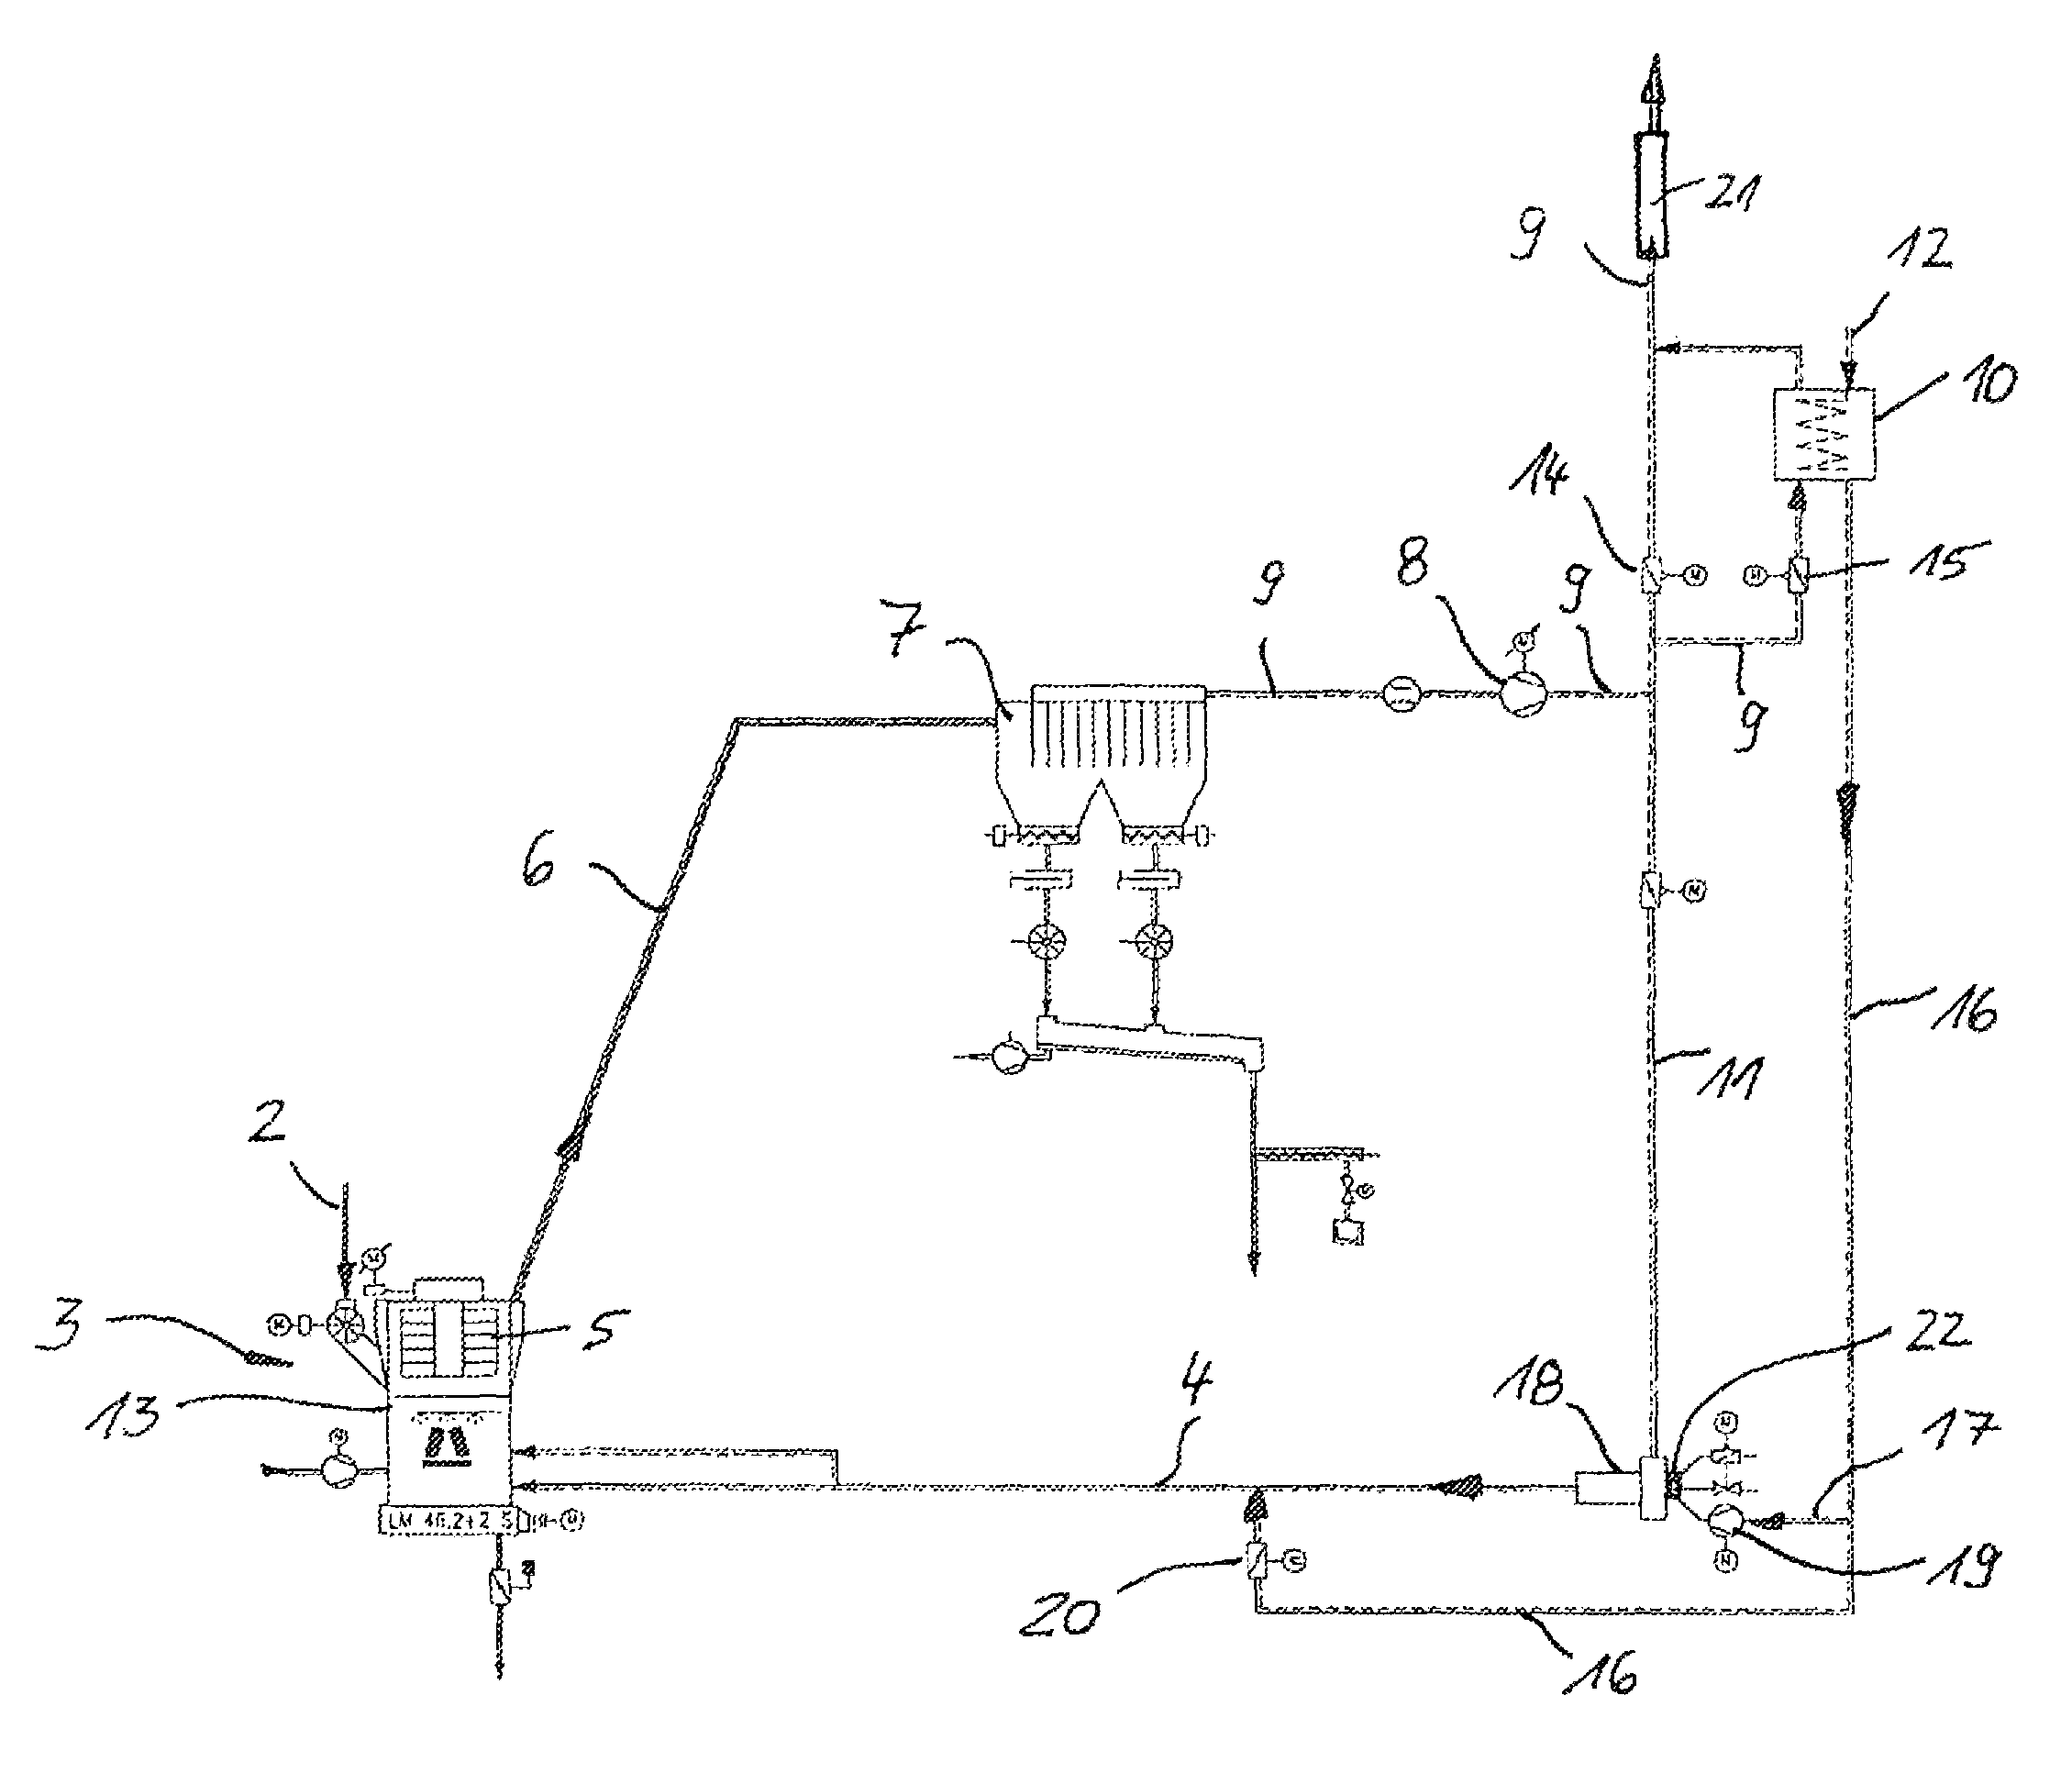 Method for comminution of mill feed